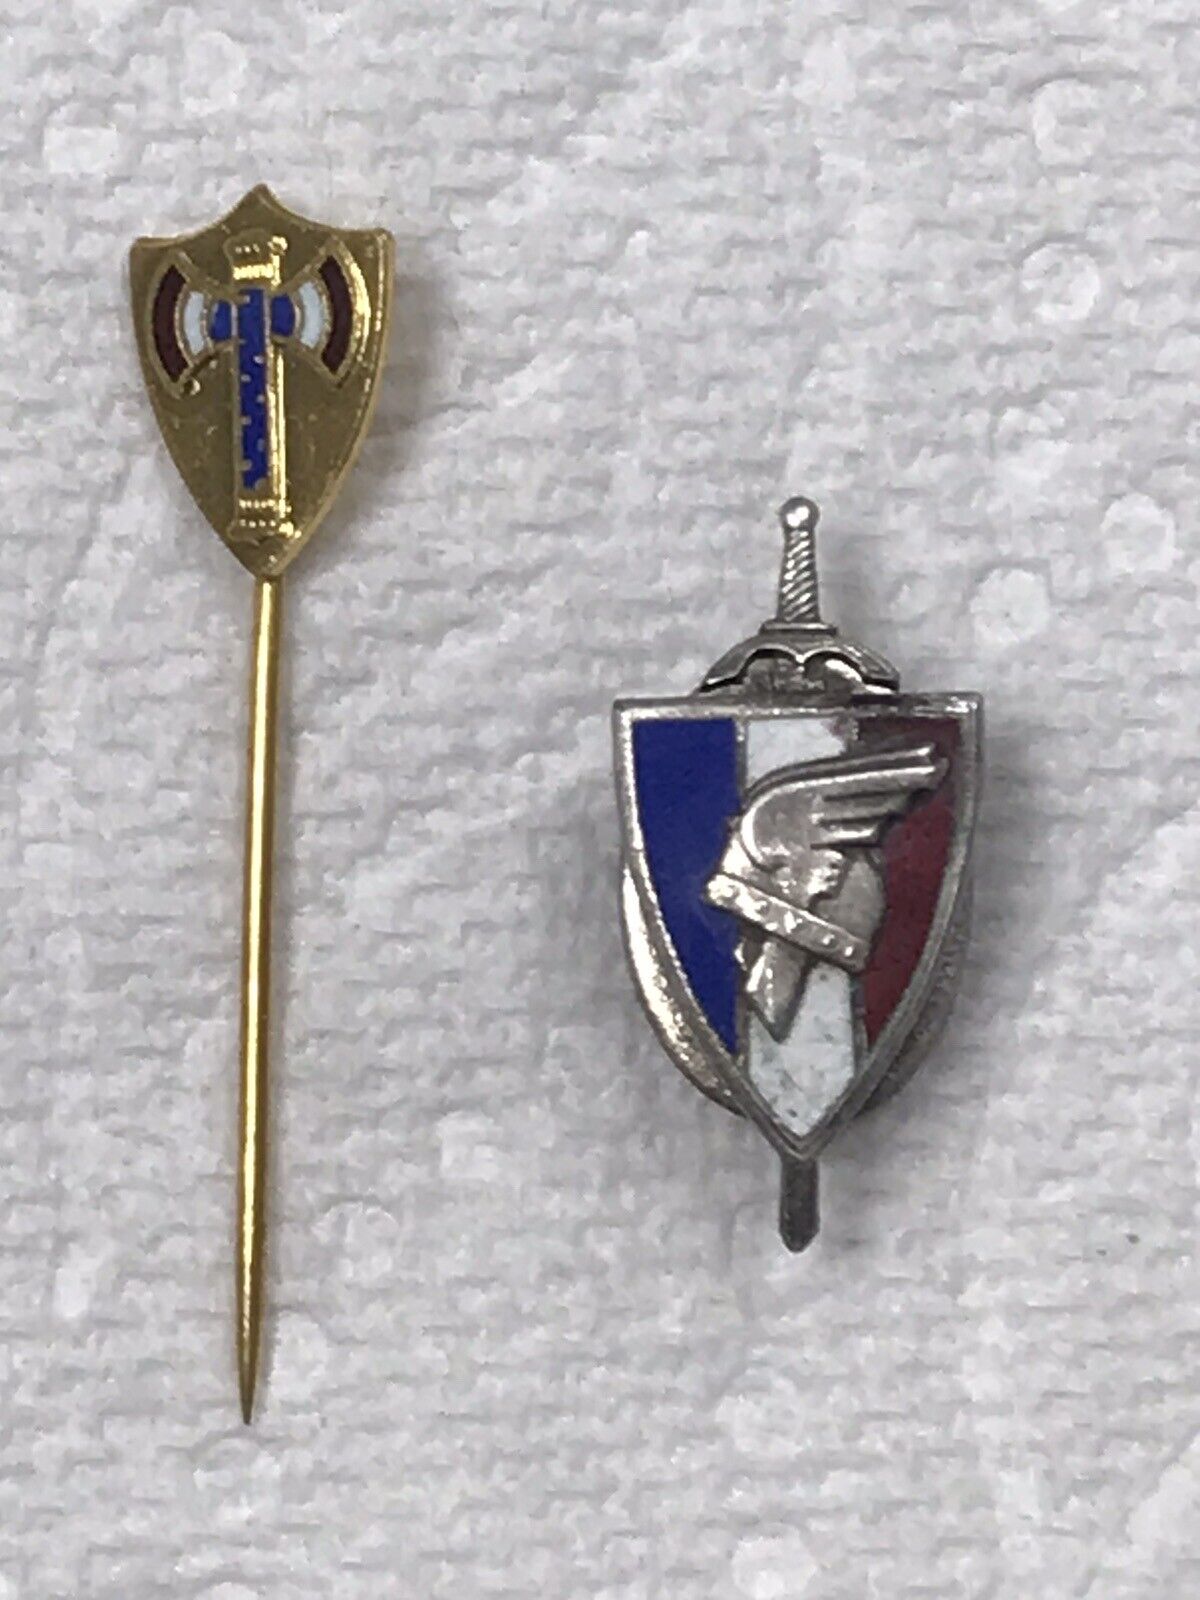 WWII WW2 FRENCH VICHY FRANCE LAPEL PINS BADGES - 2 PC SET